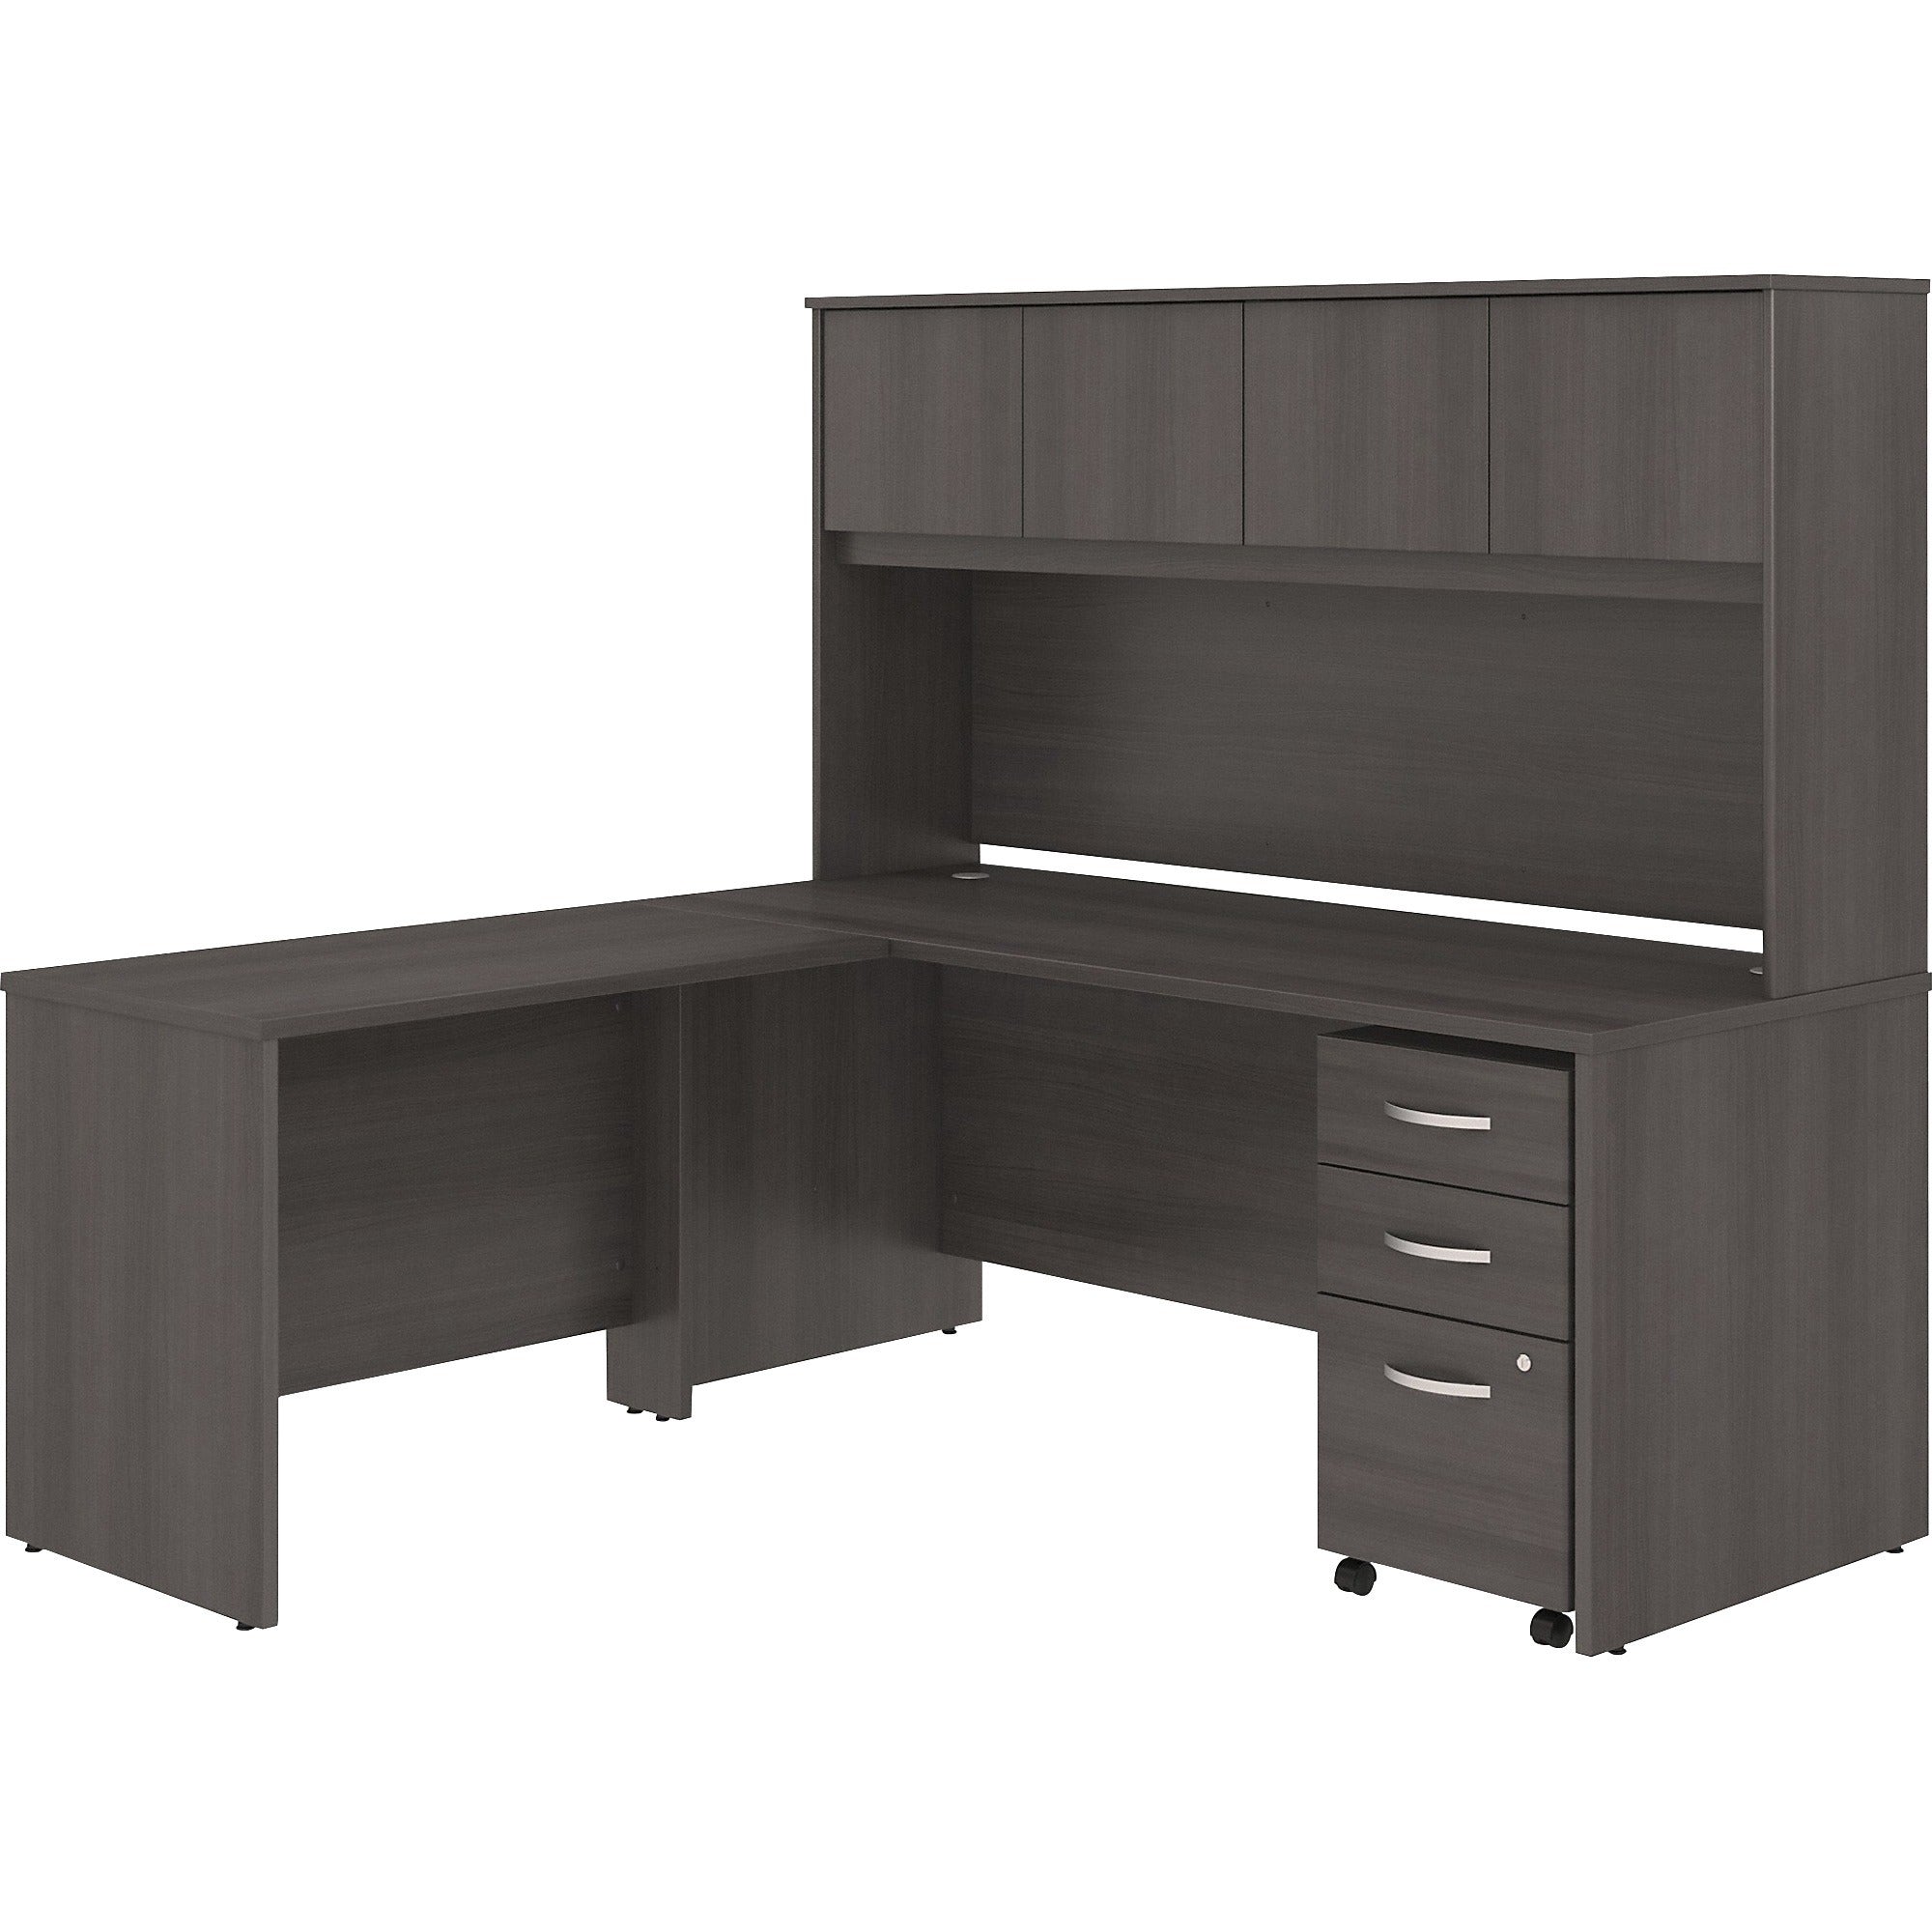 Bush Business Furniture Studio C 72W X 30D L Shaped Desk With Hutch, Mobile File Cabinet and 42W Return - 72" x 30" Desk, 42" Return, 72" Hutch - 3 x File, Box Drawer(s) - 4 Door(s) - Band Edge - Finish: Storm Gray, Thermofused Laminate (TFL) - 1